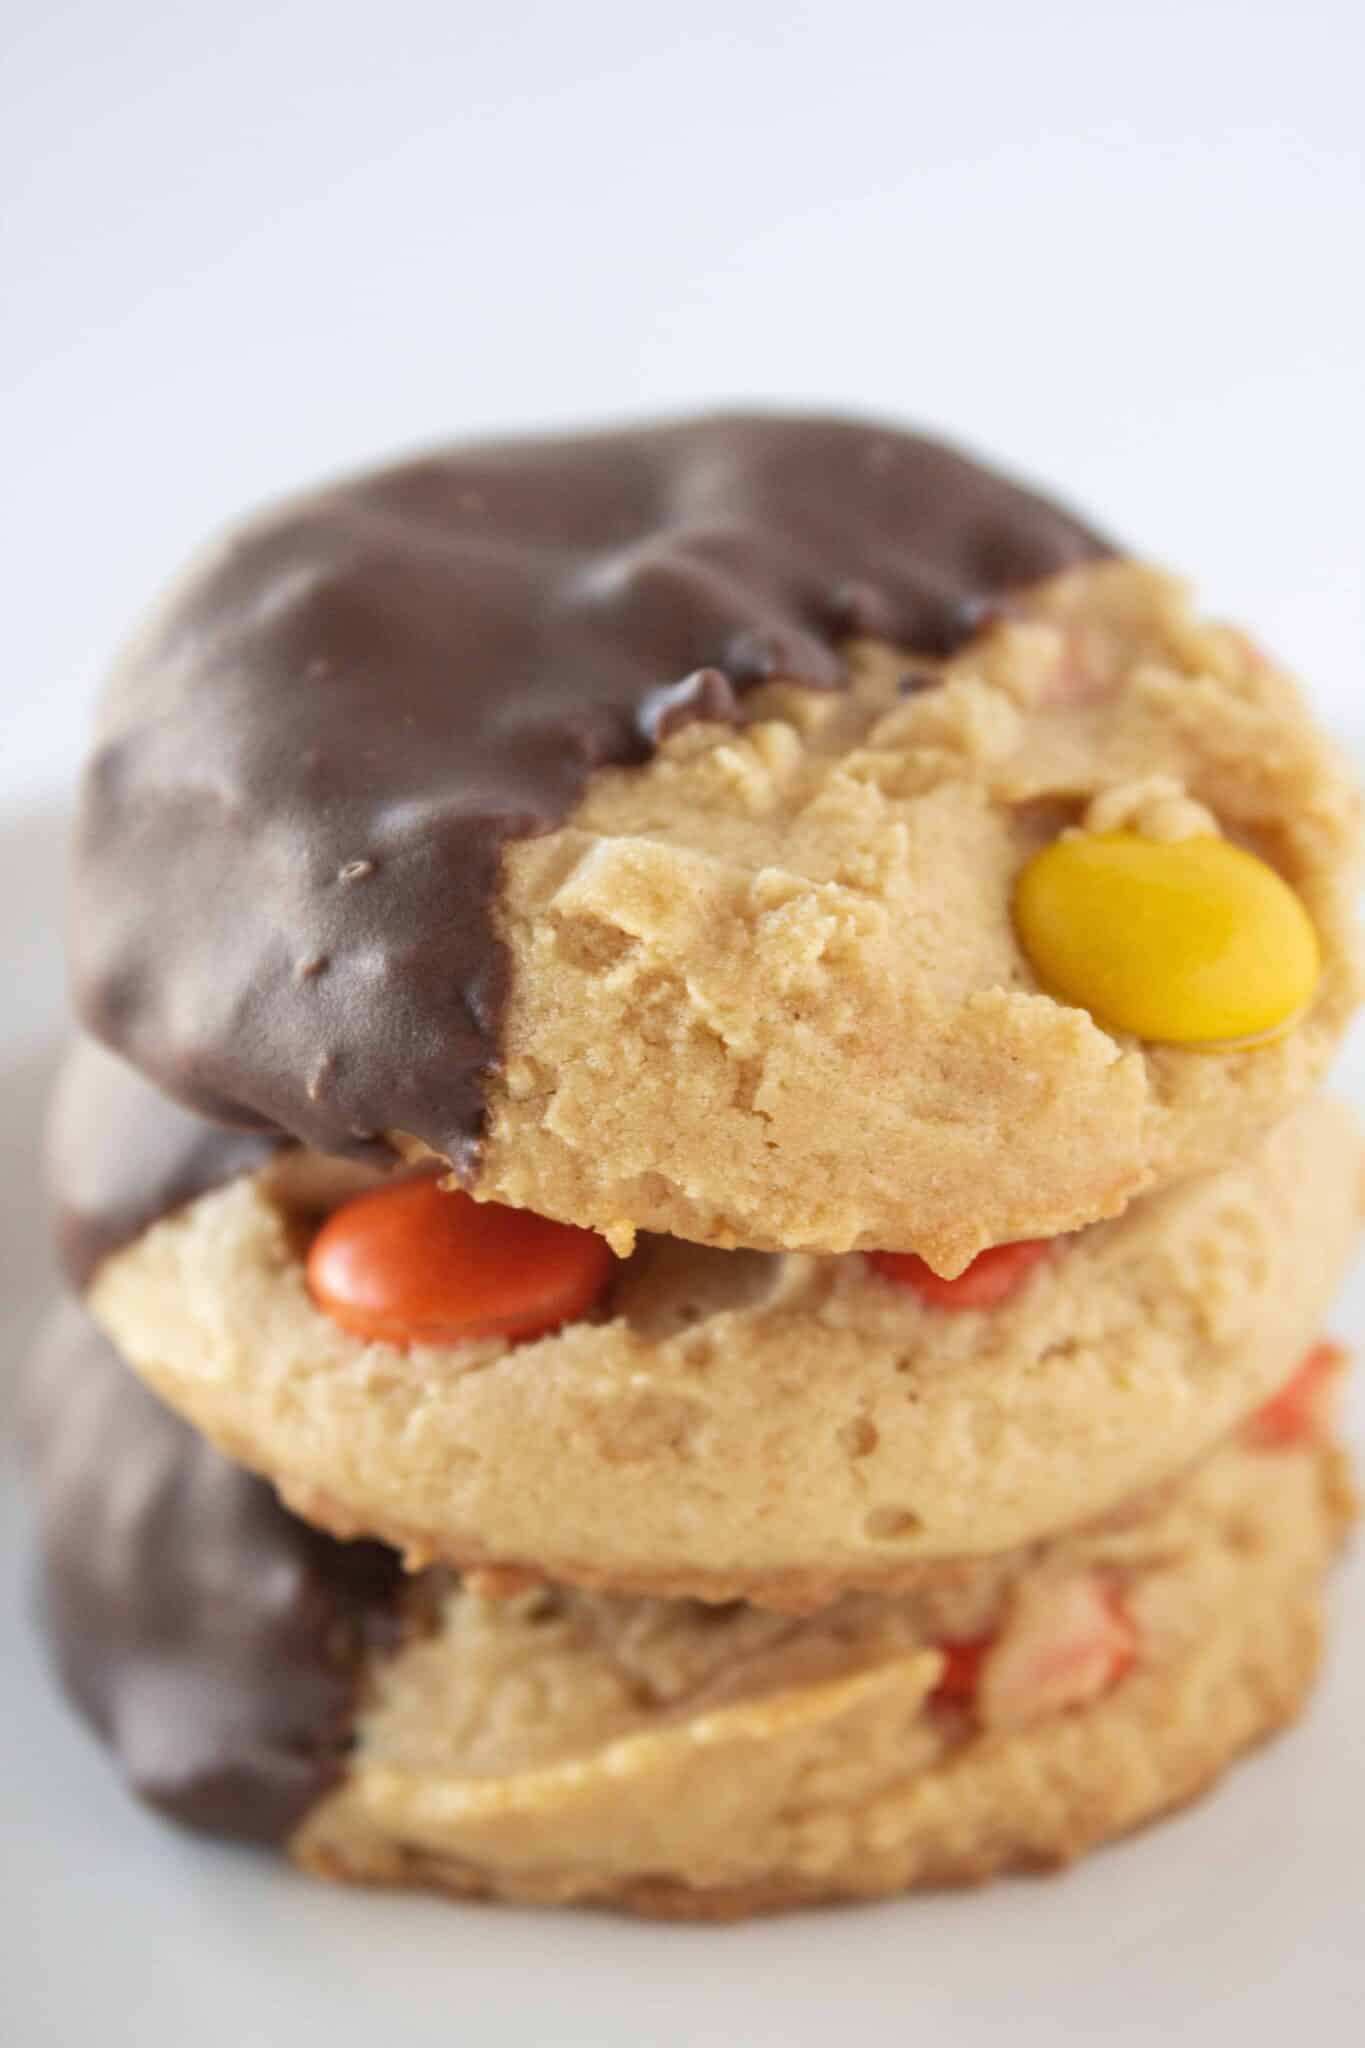 Reese's Pieces Peanut Butter Cookies Recipe with a Cake Mix and Dipped in Chocolate featured by top US cookies blogger, Practically Homemade